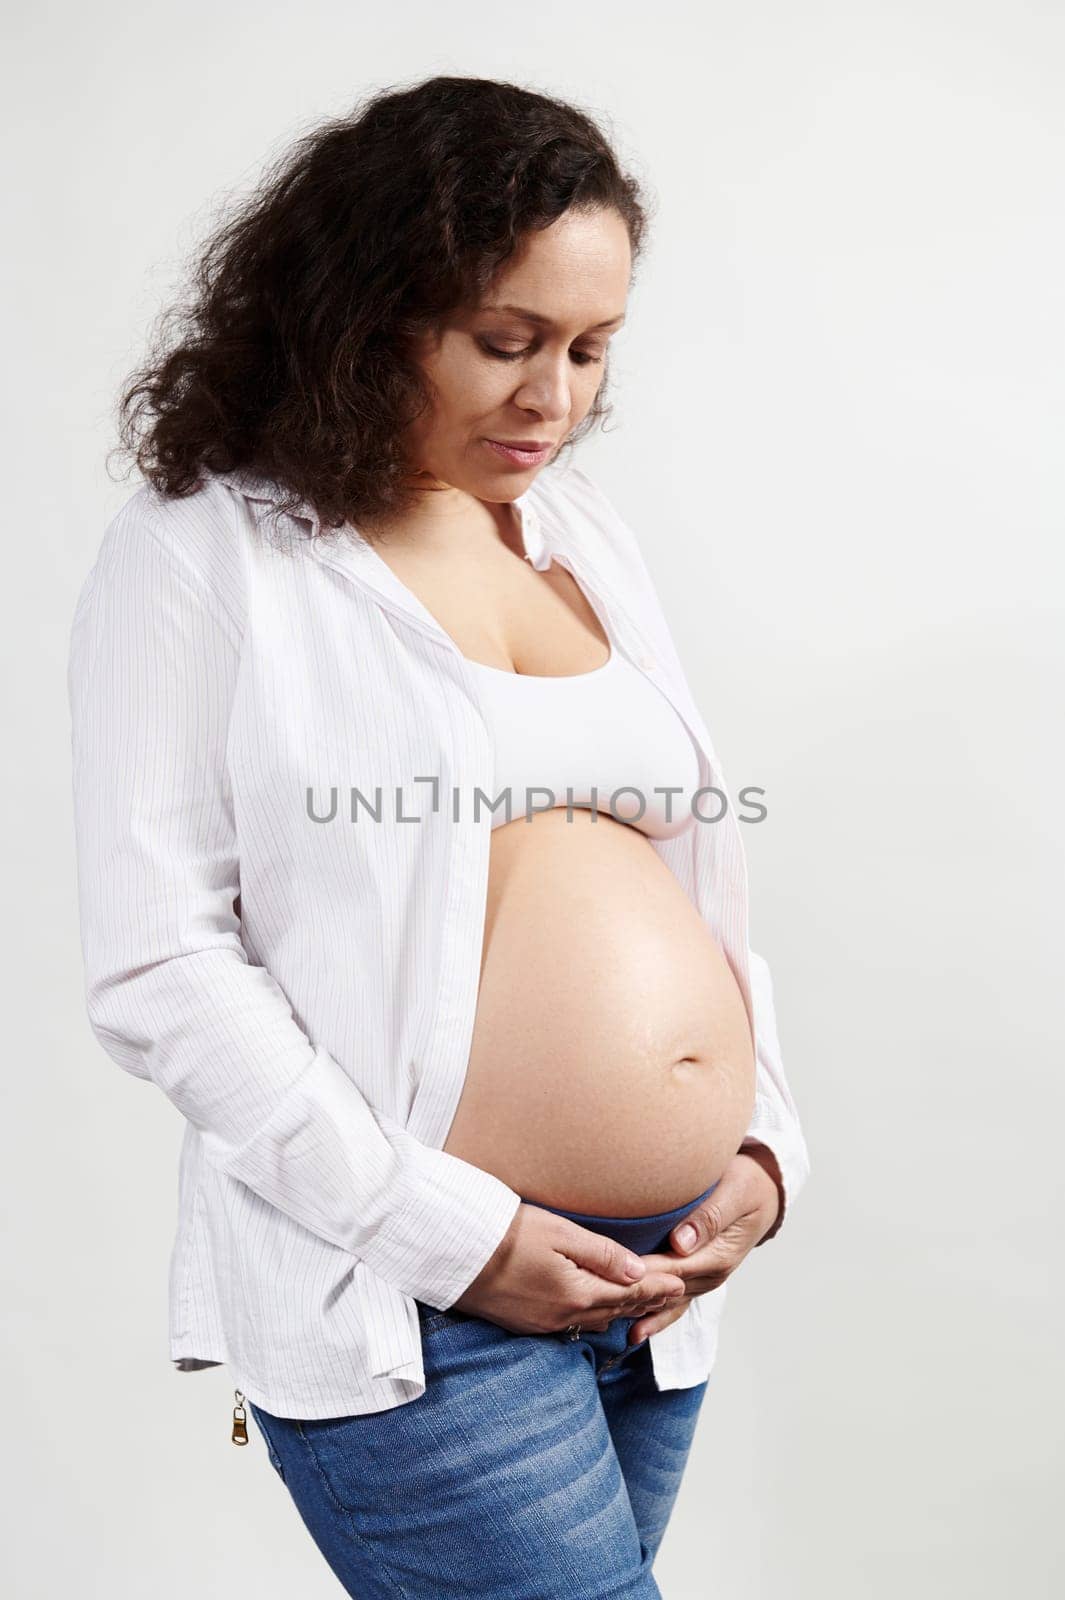 Serene ethnic pregnant woman 30s old, expecting a baby, touching belly on white background. Pregnancy 6 month. 24 weeks. by artgf